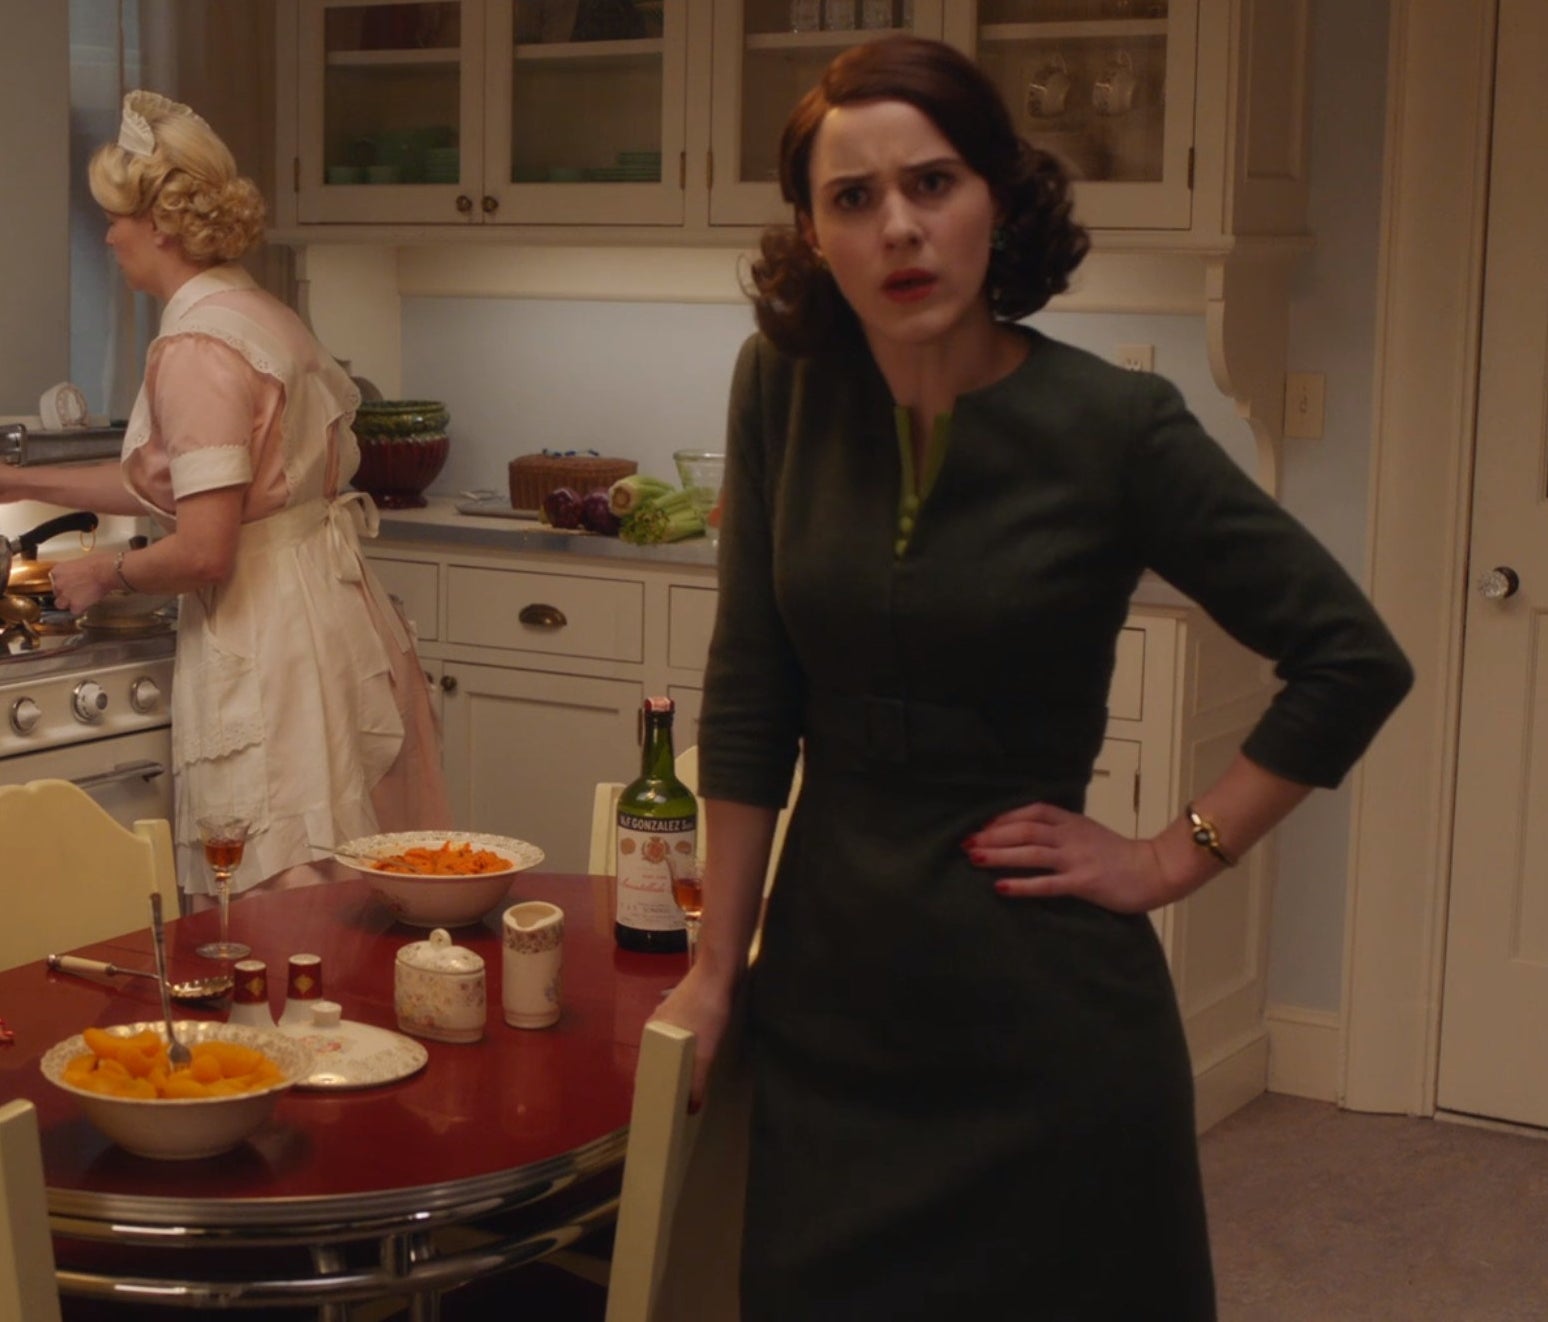 Screenshot from Mrs. Maisel shows Midge in a nice dress standing with her hand on her hip